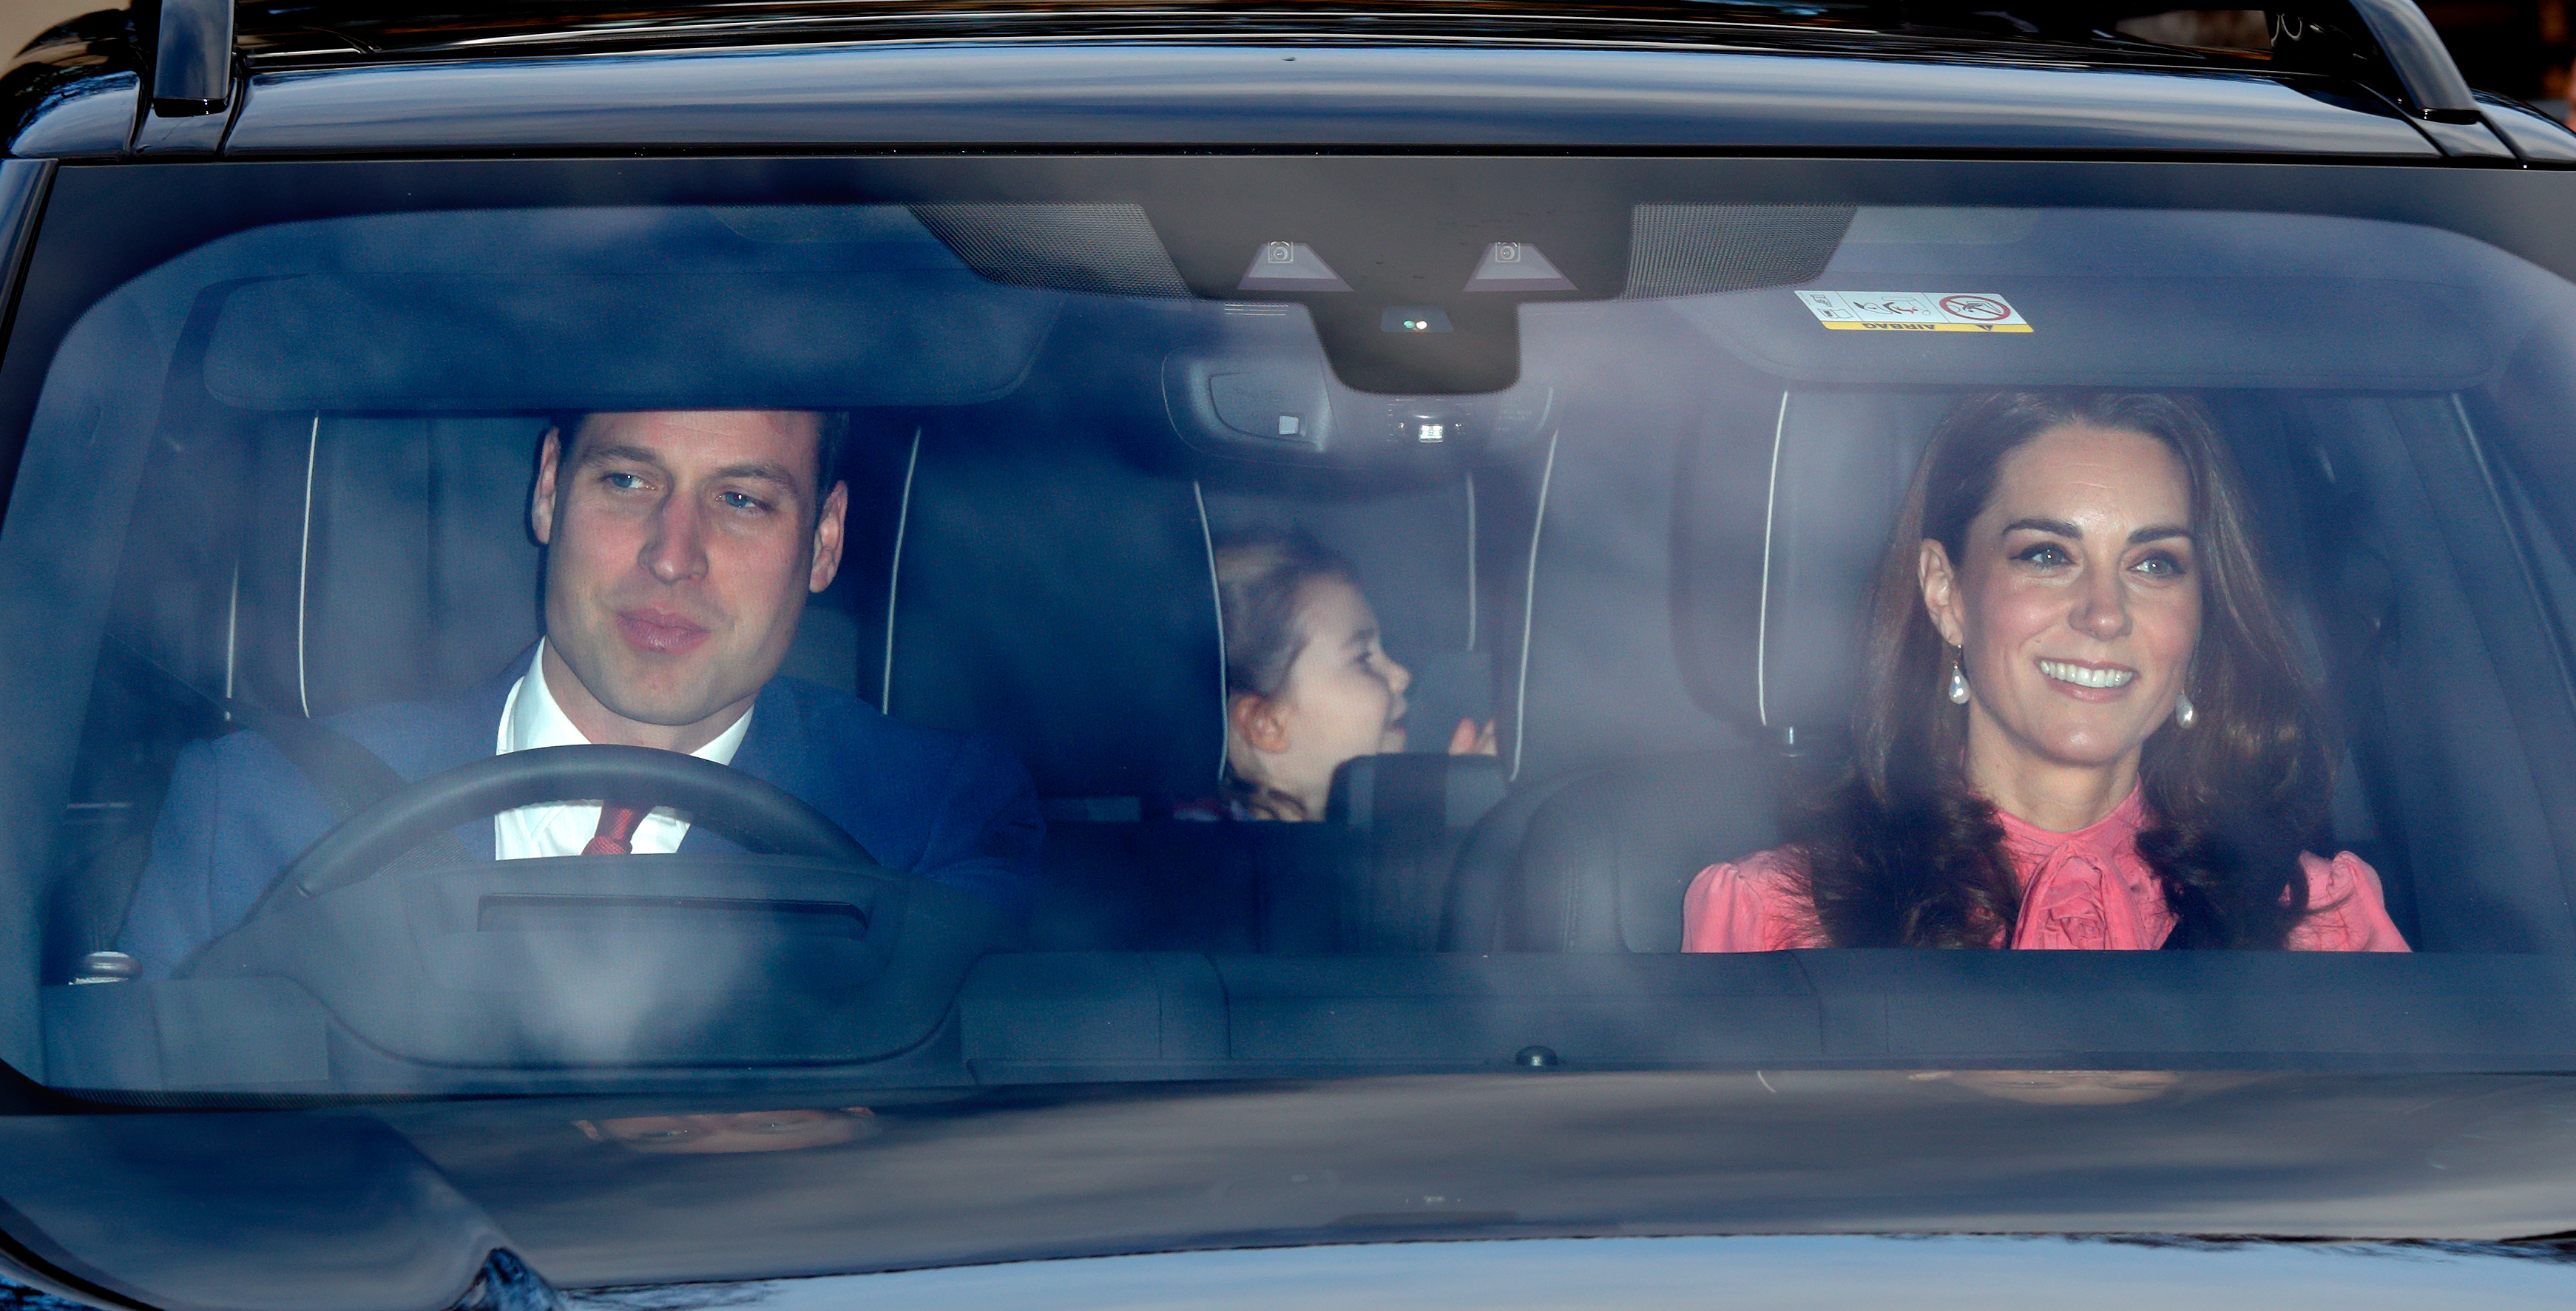 Prince William driving his family, Kate Middleton and Princess Charlotte.